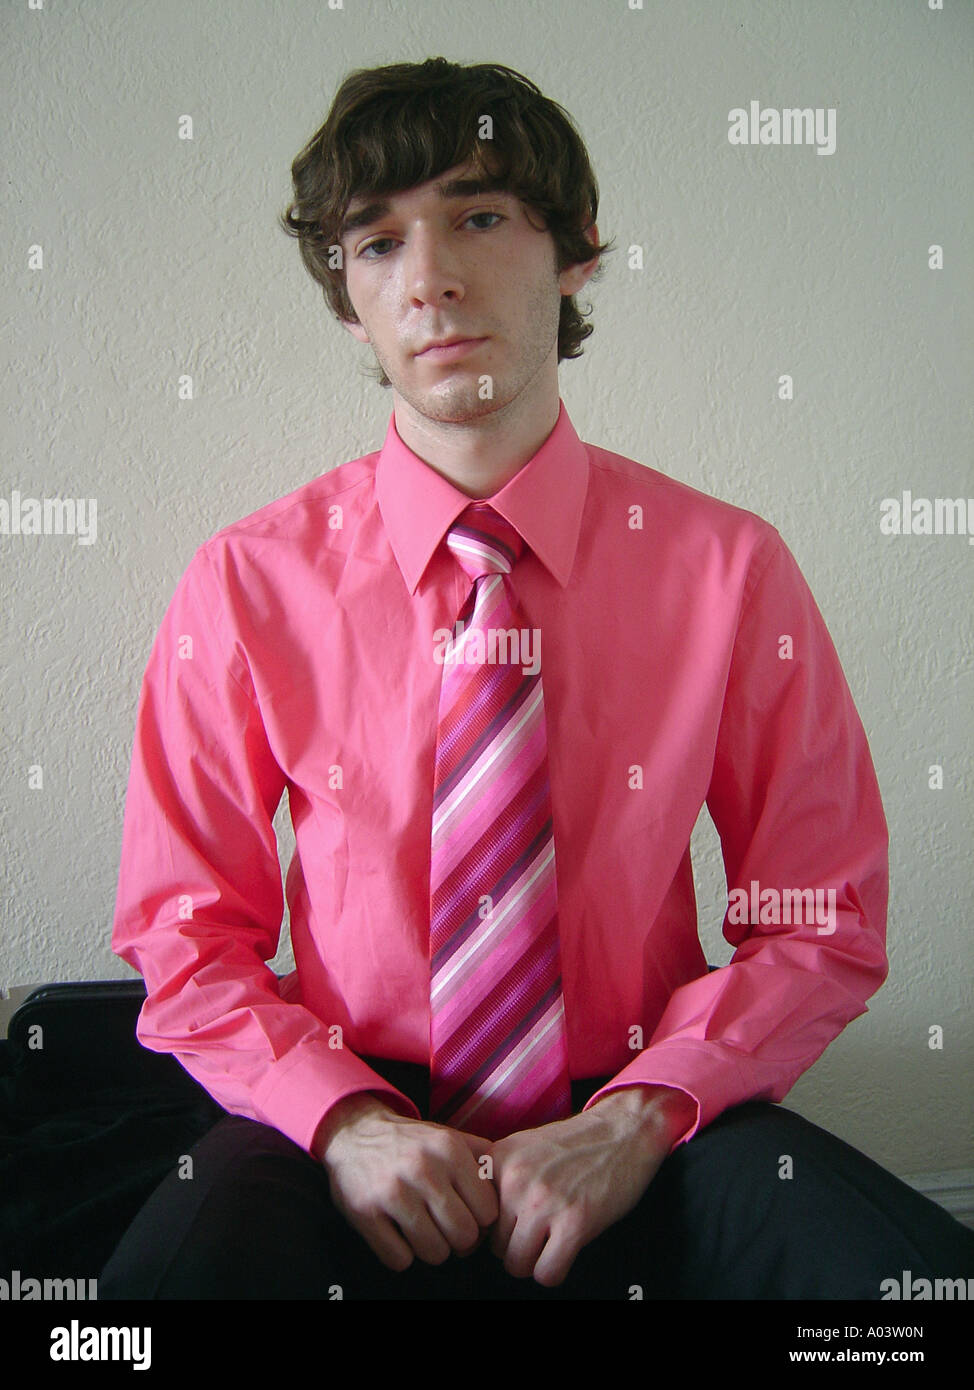 Portrait of Young Man Wearing A Pink Shirt and a Pink Striped Necktie Tie He is Looking Into Camera Lens Stock Photo